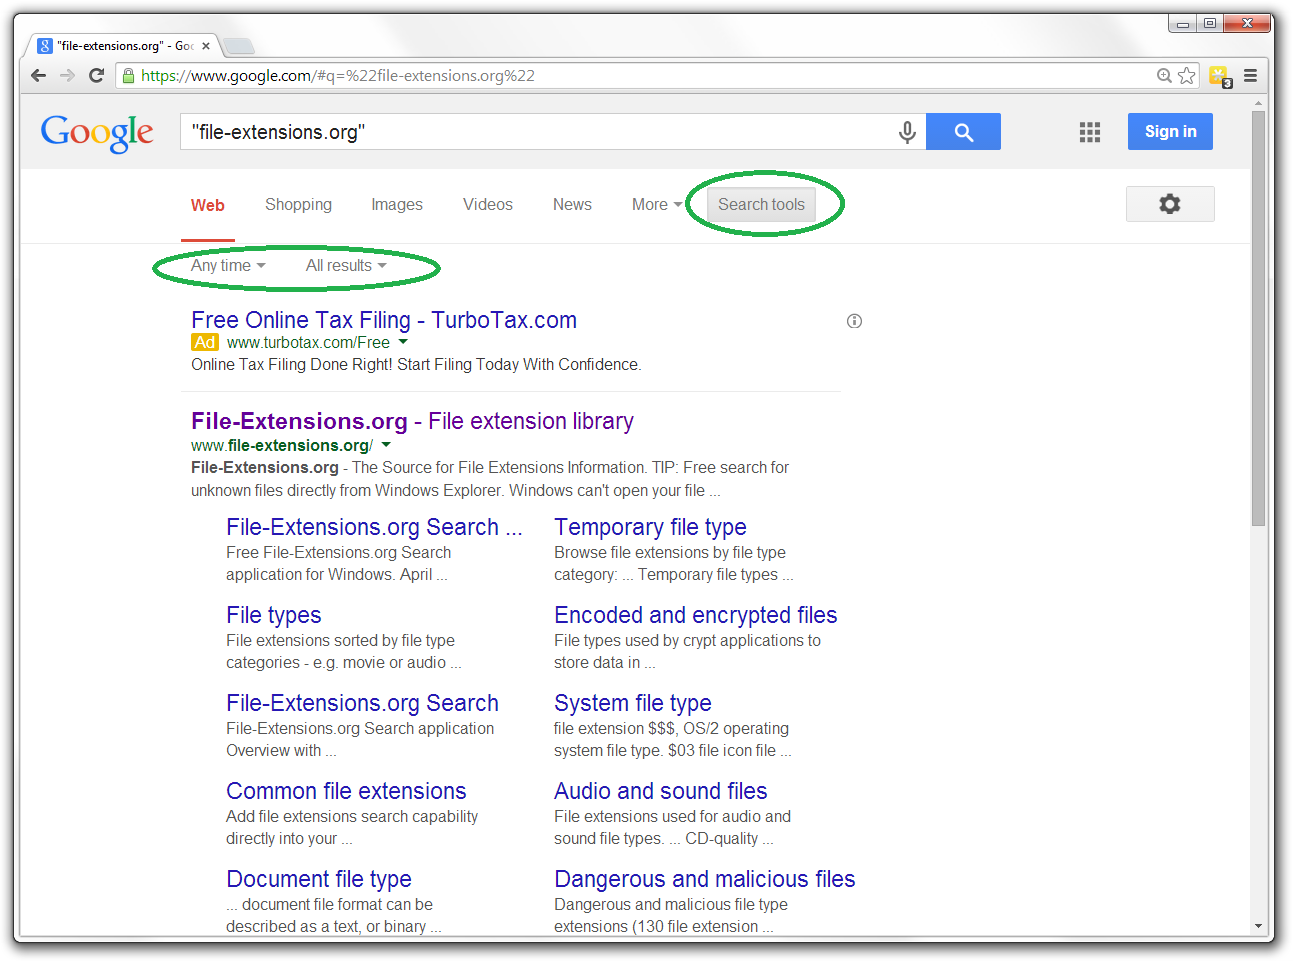 Search Tools for Google Search